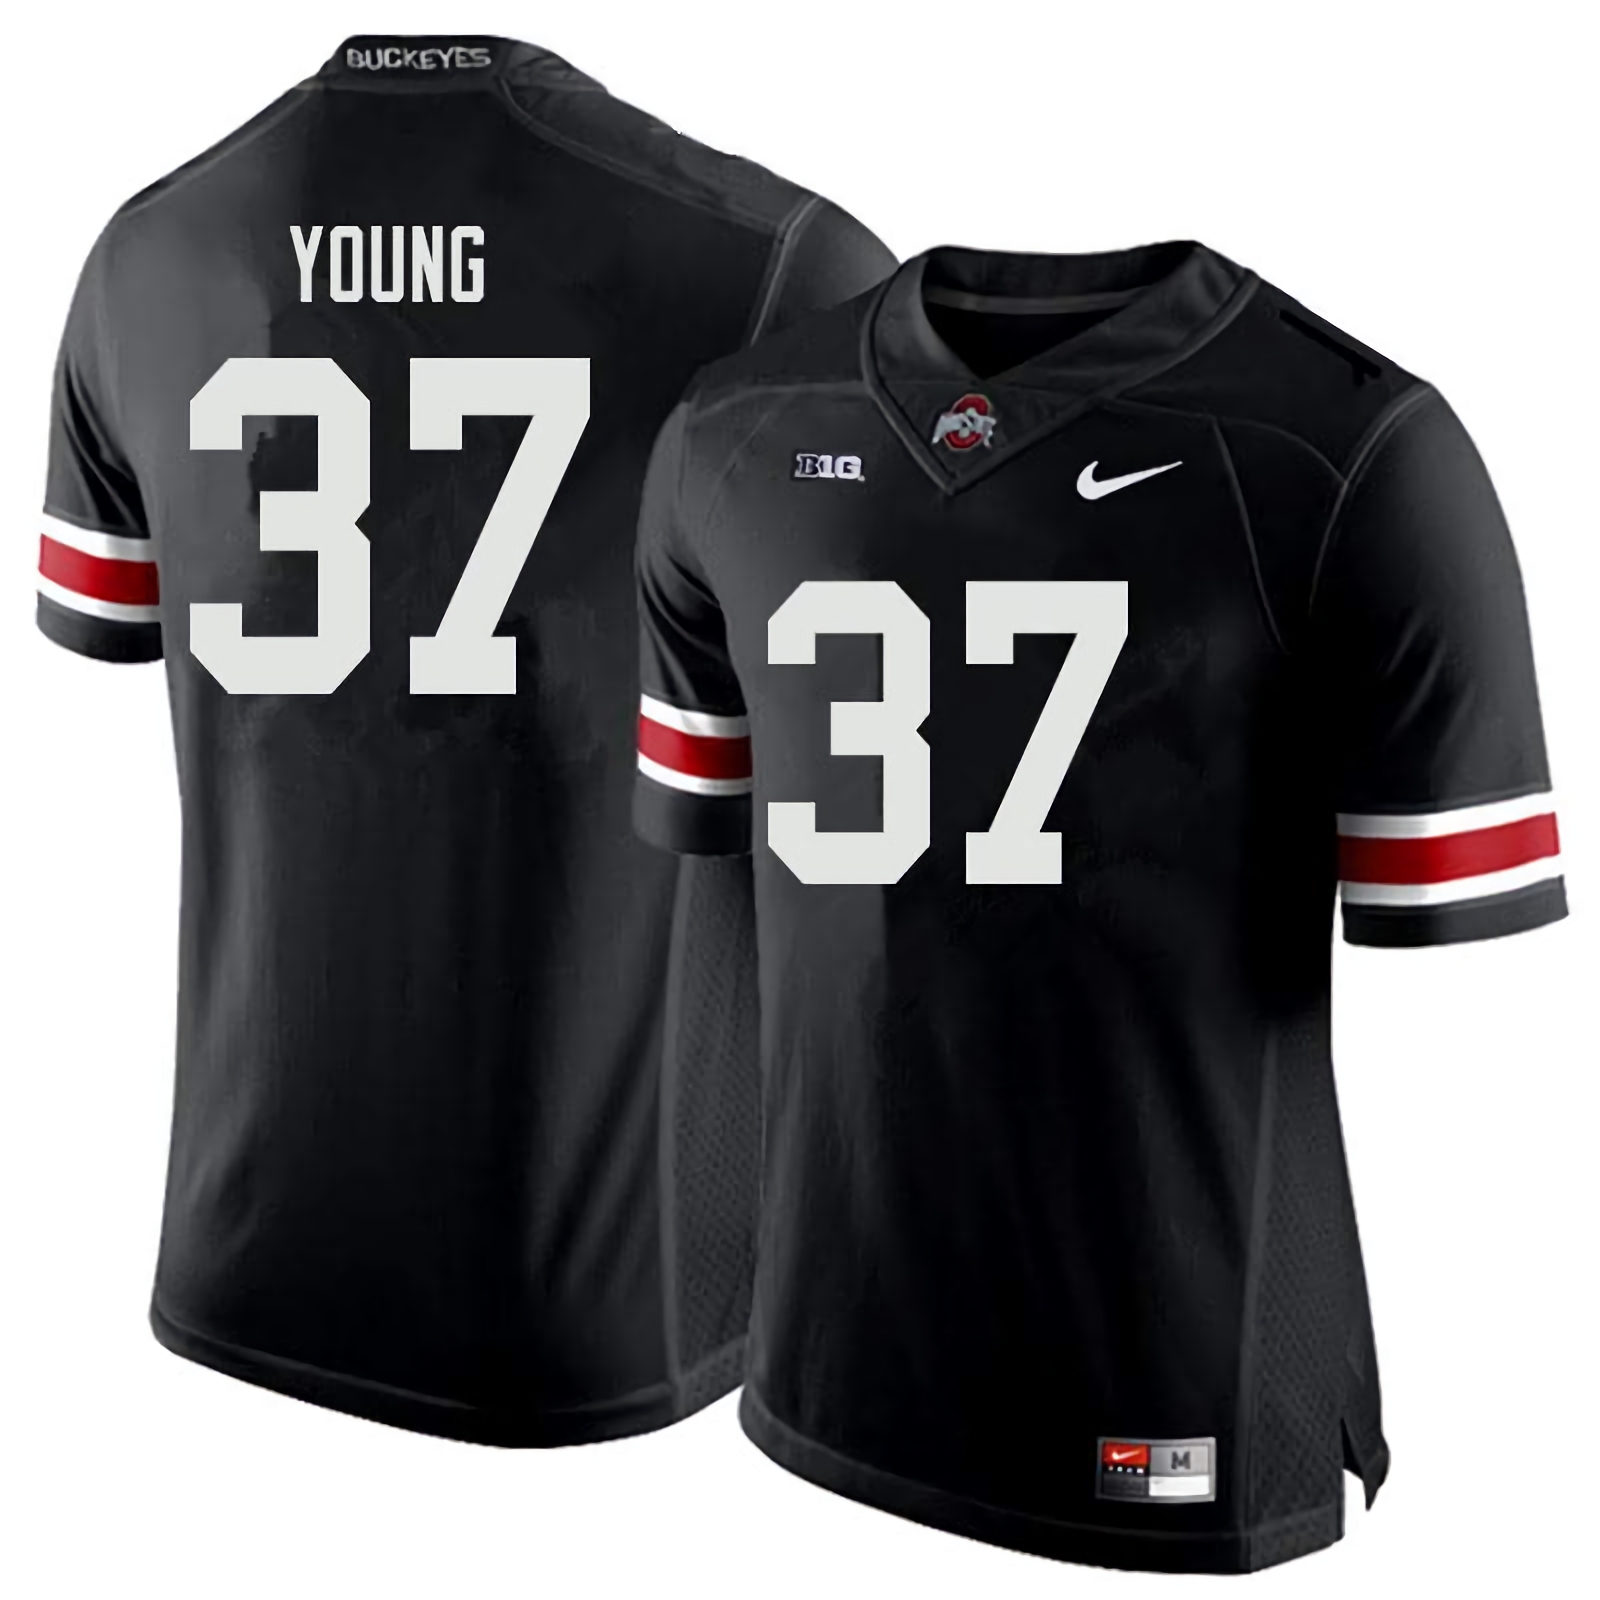 Craig Young Ohio State Buckeyes Men's NCAA #37 Nike Black College Stitched Football Jersey UMN5456YH